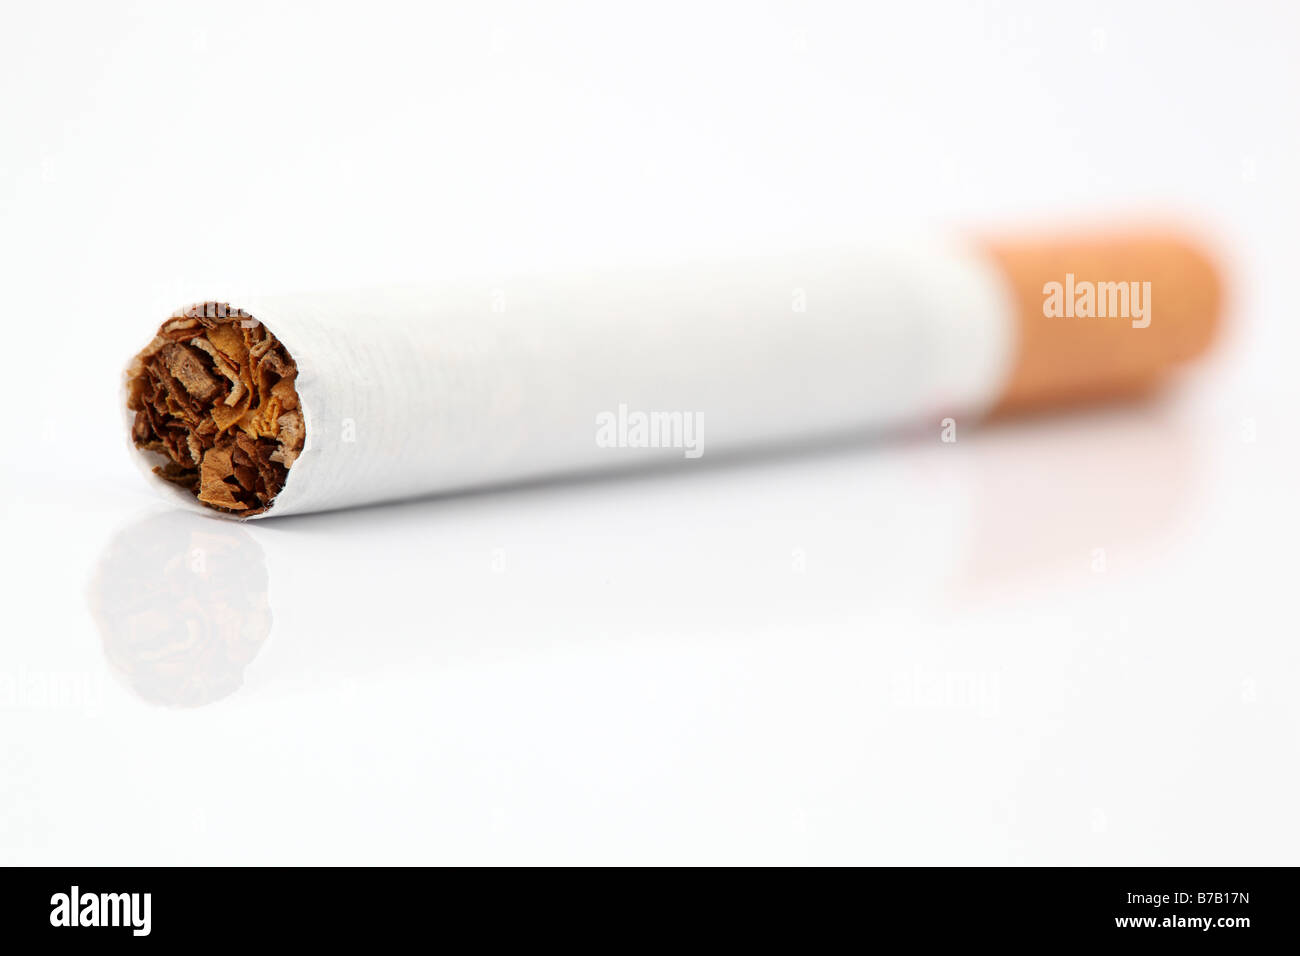 on cigarette with reflection focus on tobacco on white background Stock Photo